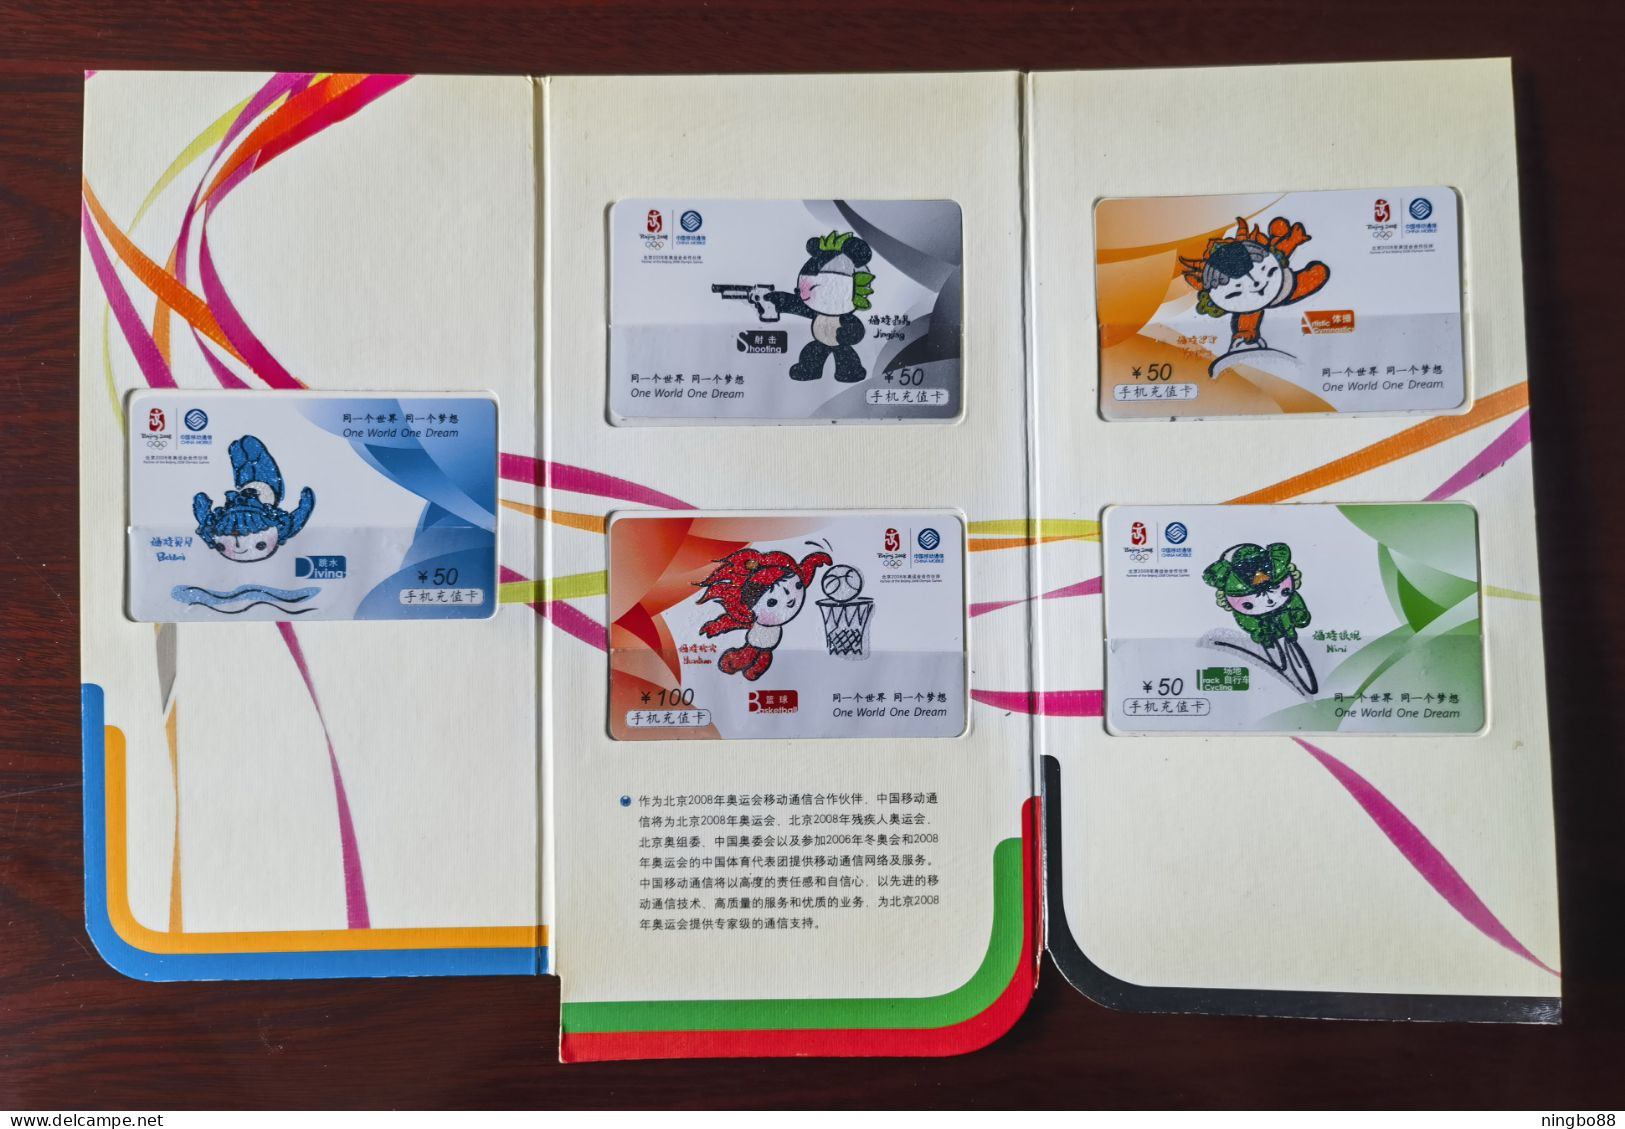 China 2008 Set Of 5 Beijing 2008 Olympic Games Mascot Fuwa Top-up Cards In Fold,used - Olympische Spelen